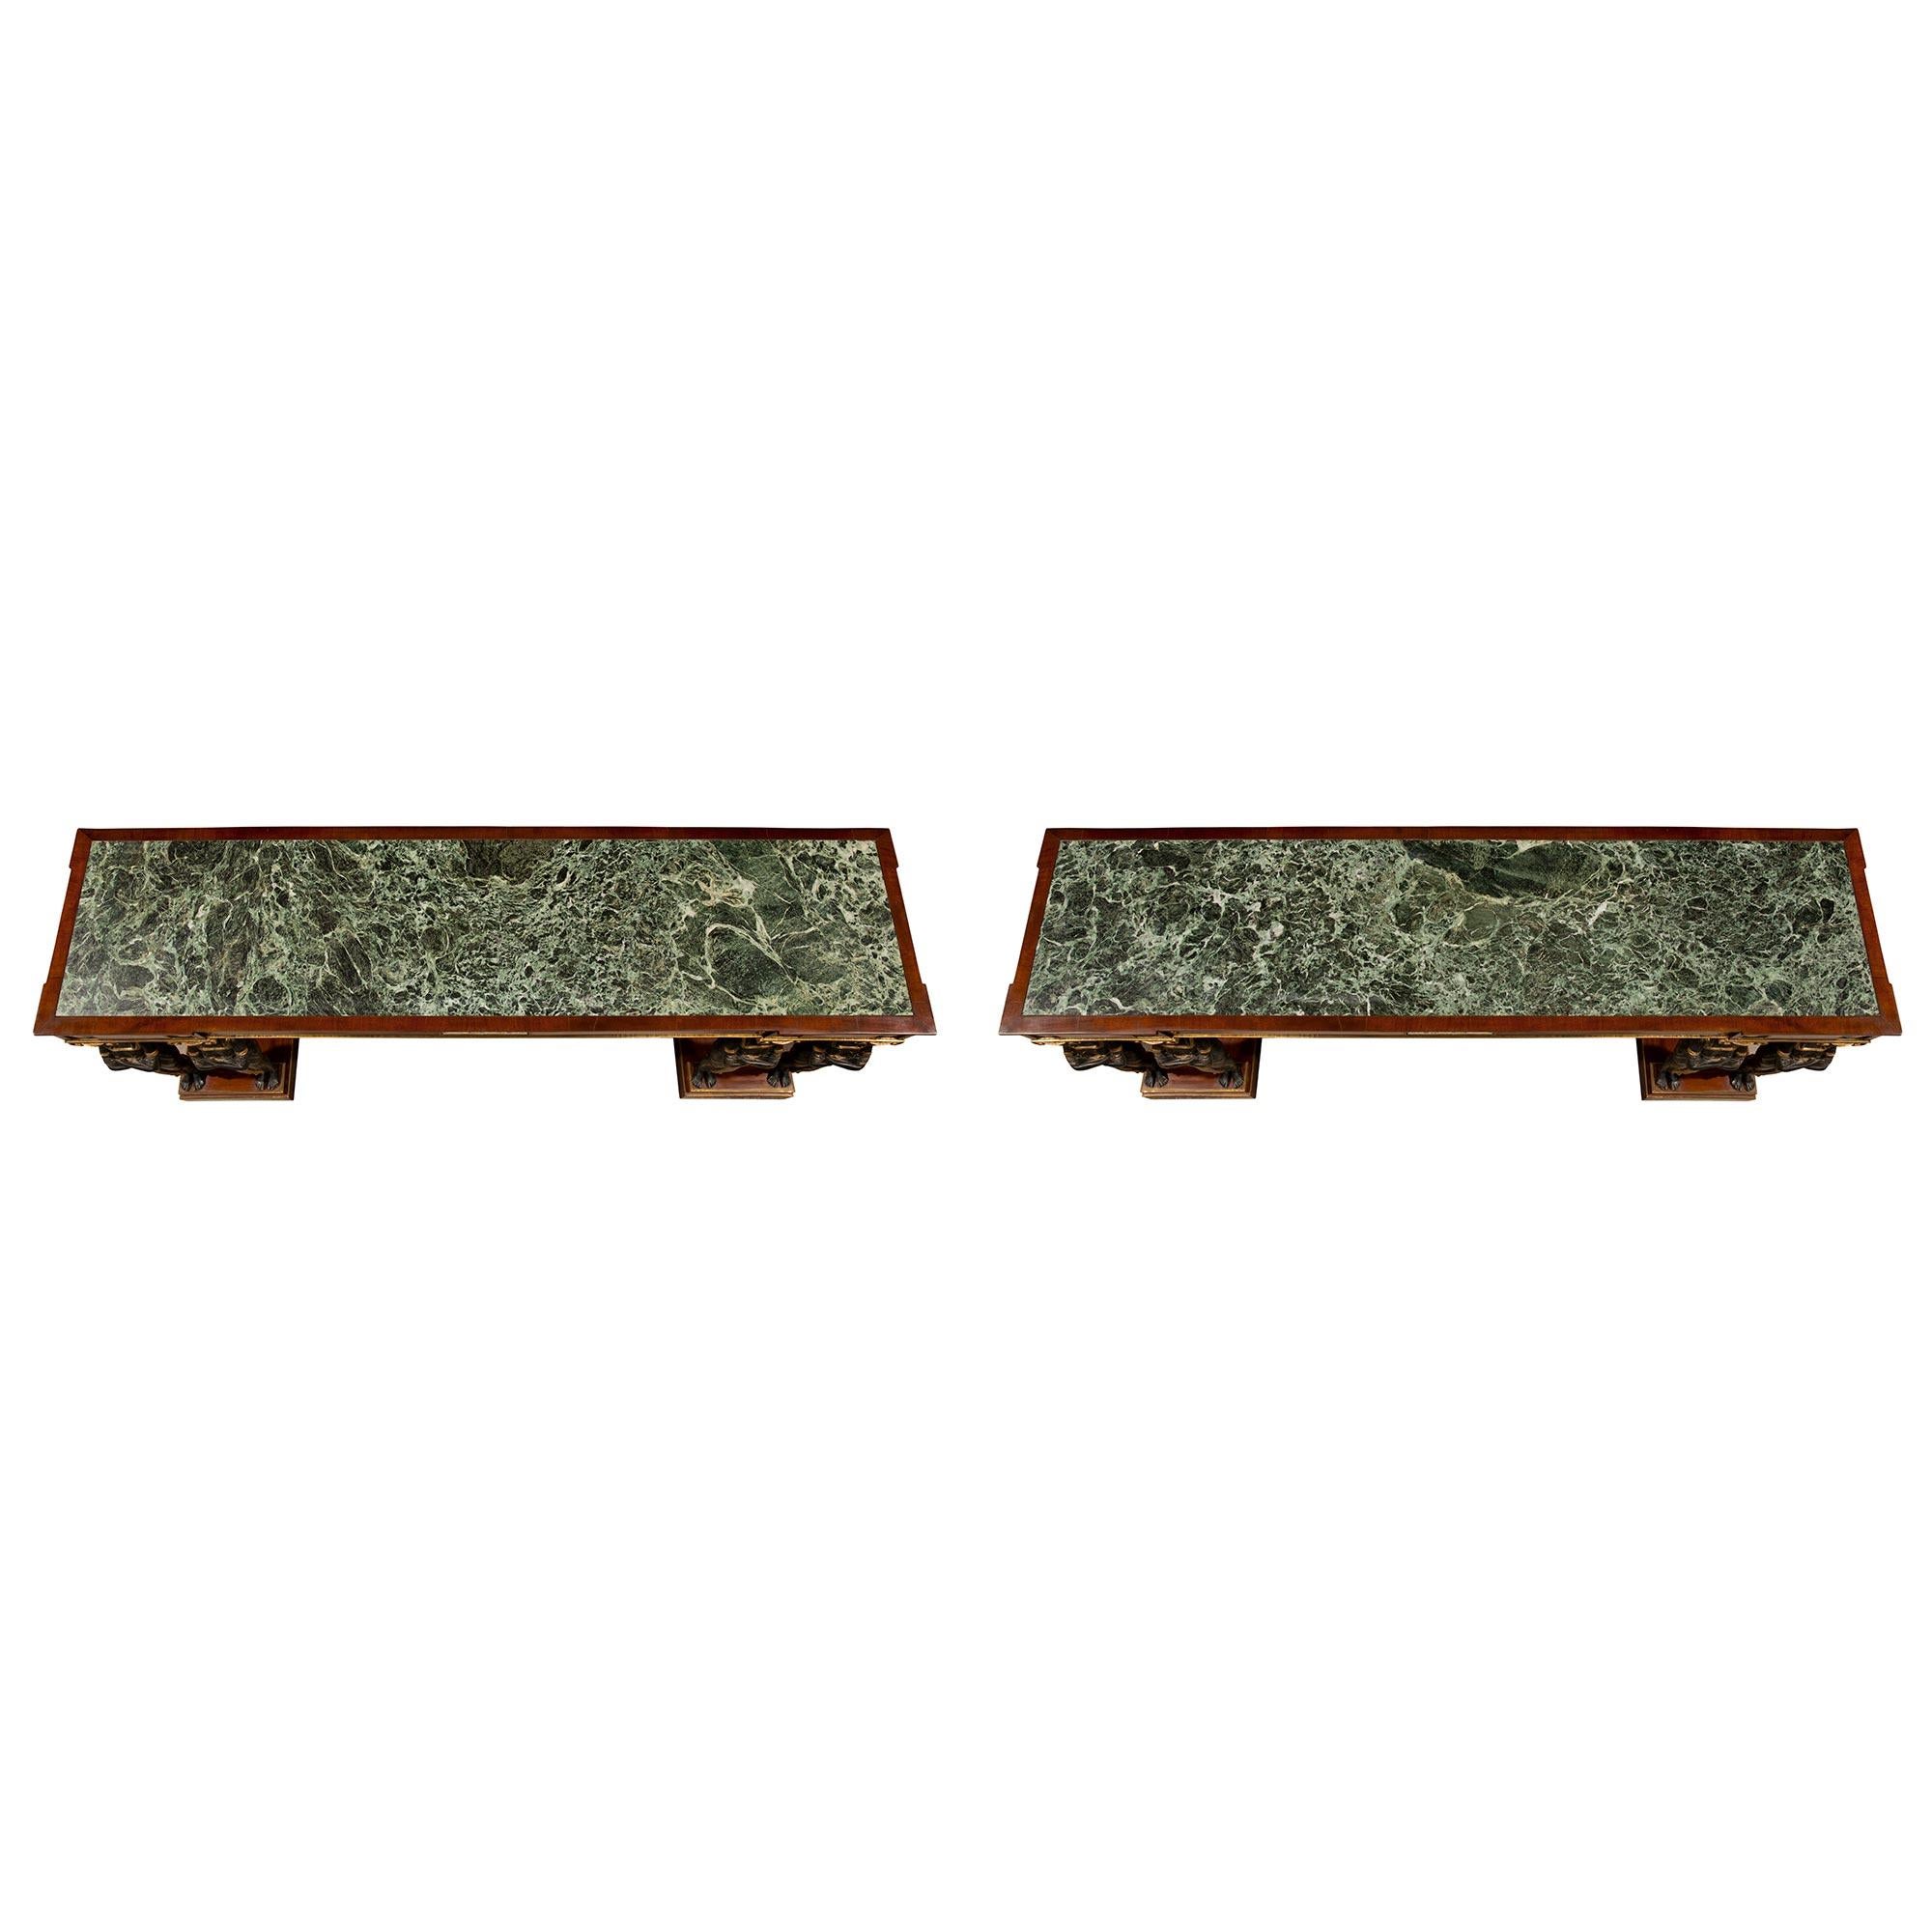 A sensational pair of Italian mid 19th century Empire st. freestanding flamed mahogany consoles from Naples, Italy. The consoles are raised by double mottled rectangular bases with brass edges. Each flamed mahogany console is supported by patinated